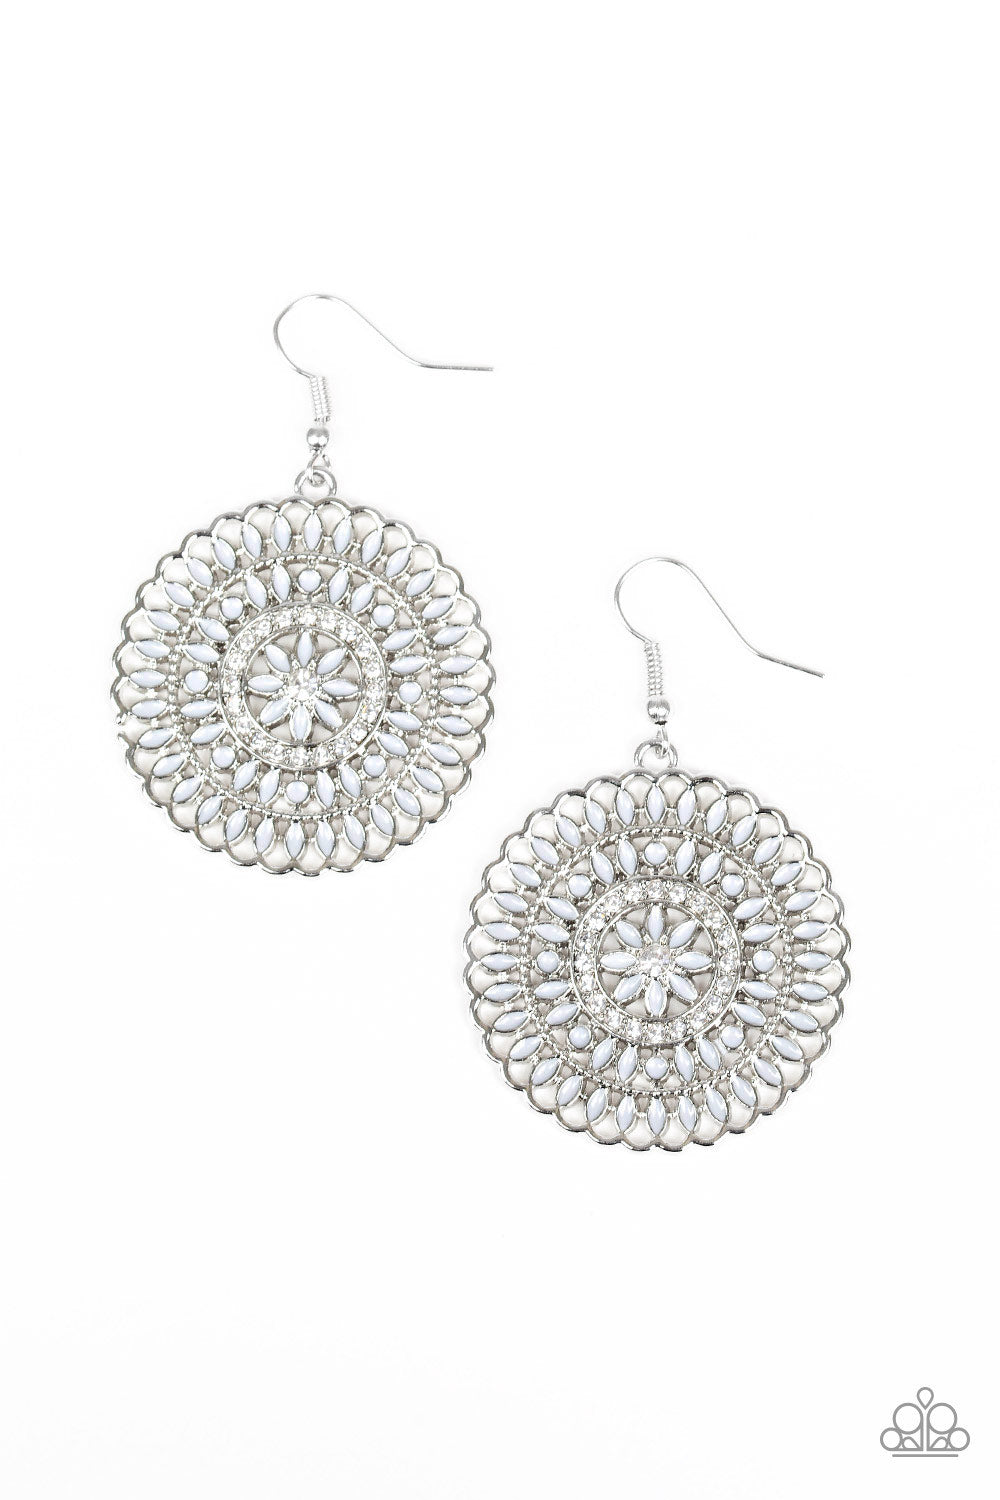 PINWHEEL AND DEAL - SILVER GRAY PETALS FLORAL ROUND RHINESTONE EARRINGS